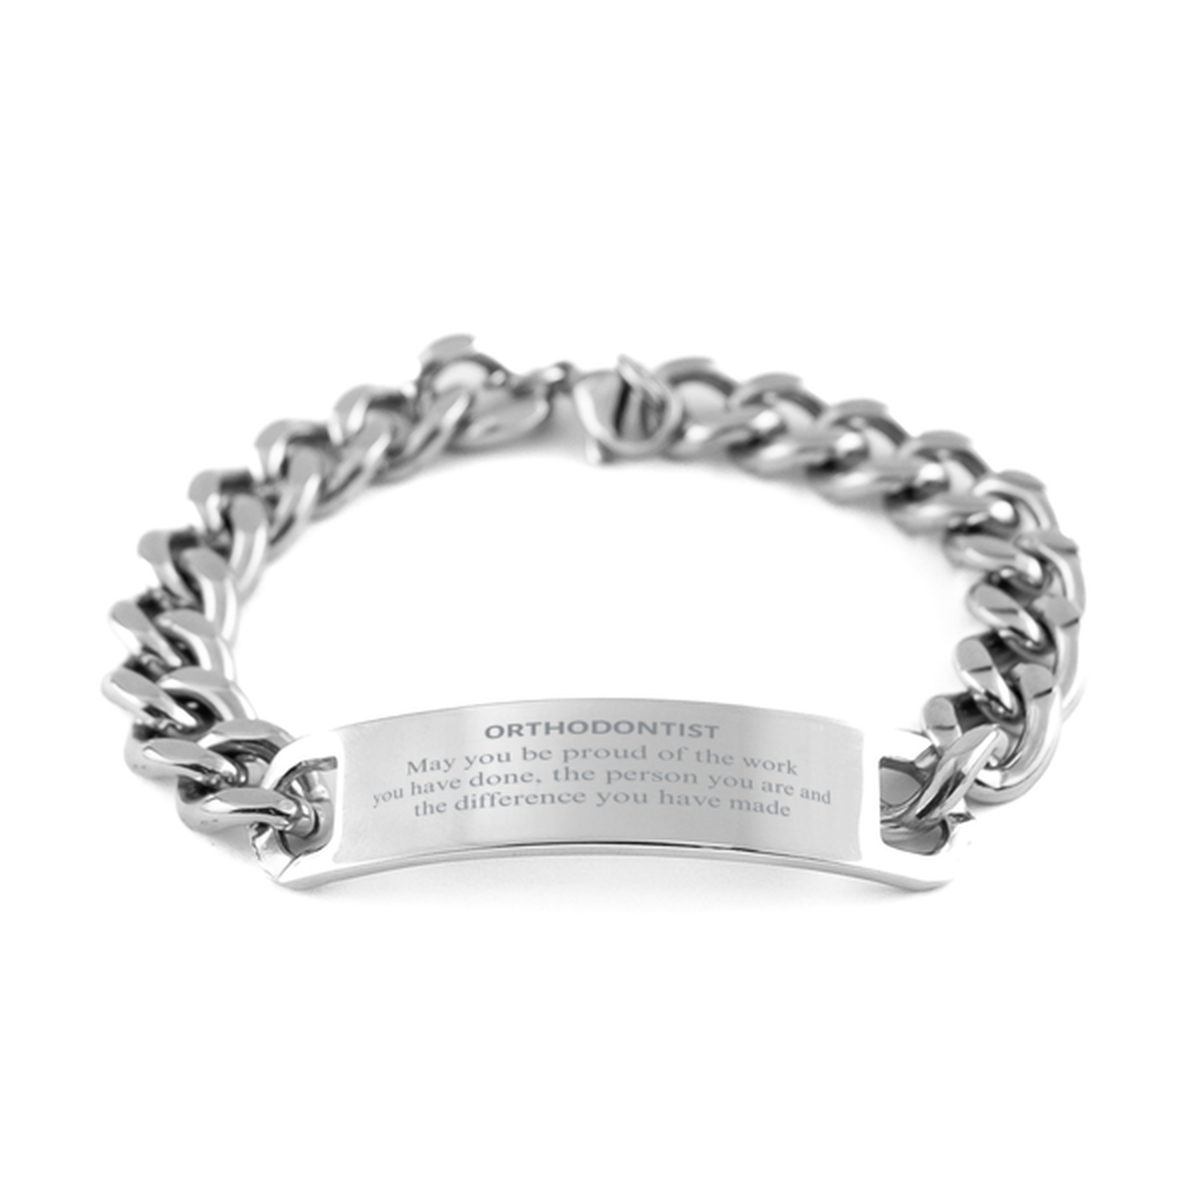 Orthodontist May you be proud of the work you have done, Retirement Orthodontist Cuban Chain Stainless Steel Bracelet for Colleague Appreciation Gifts Amazing for Orthodontist